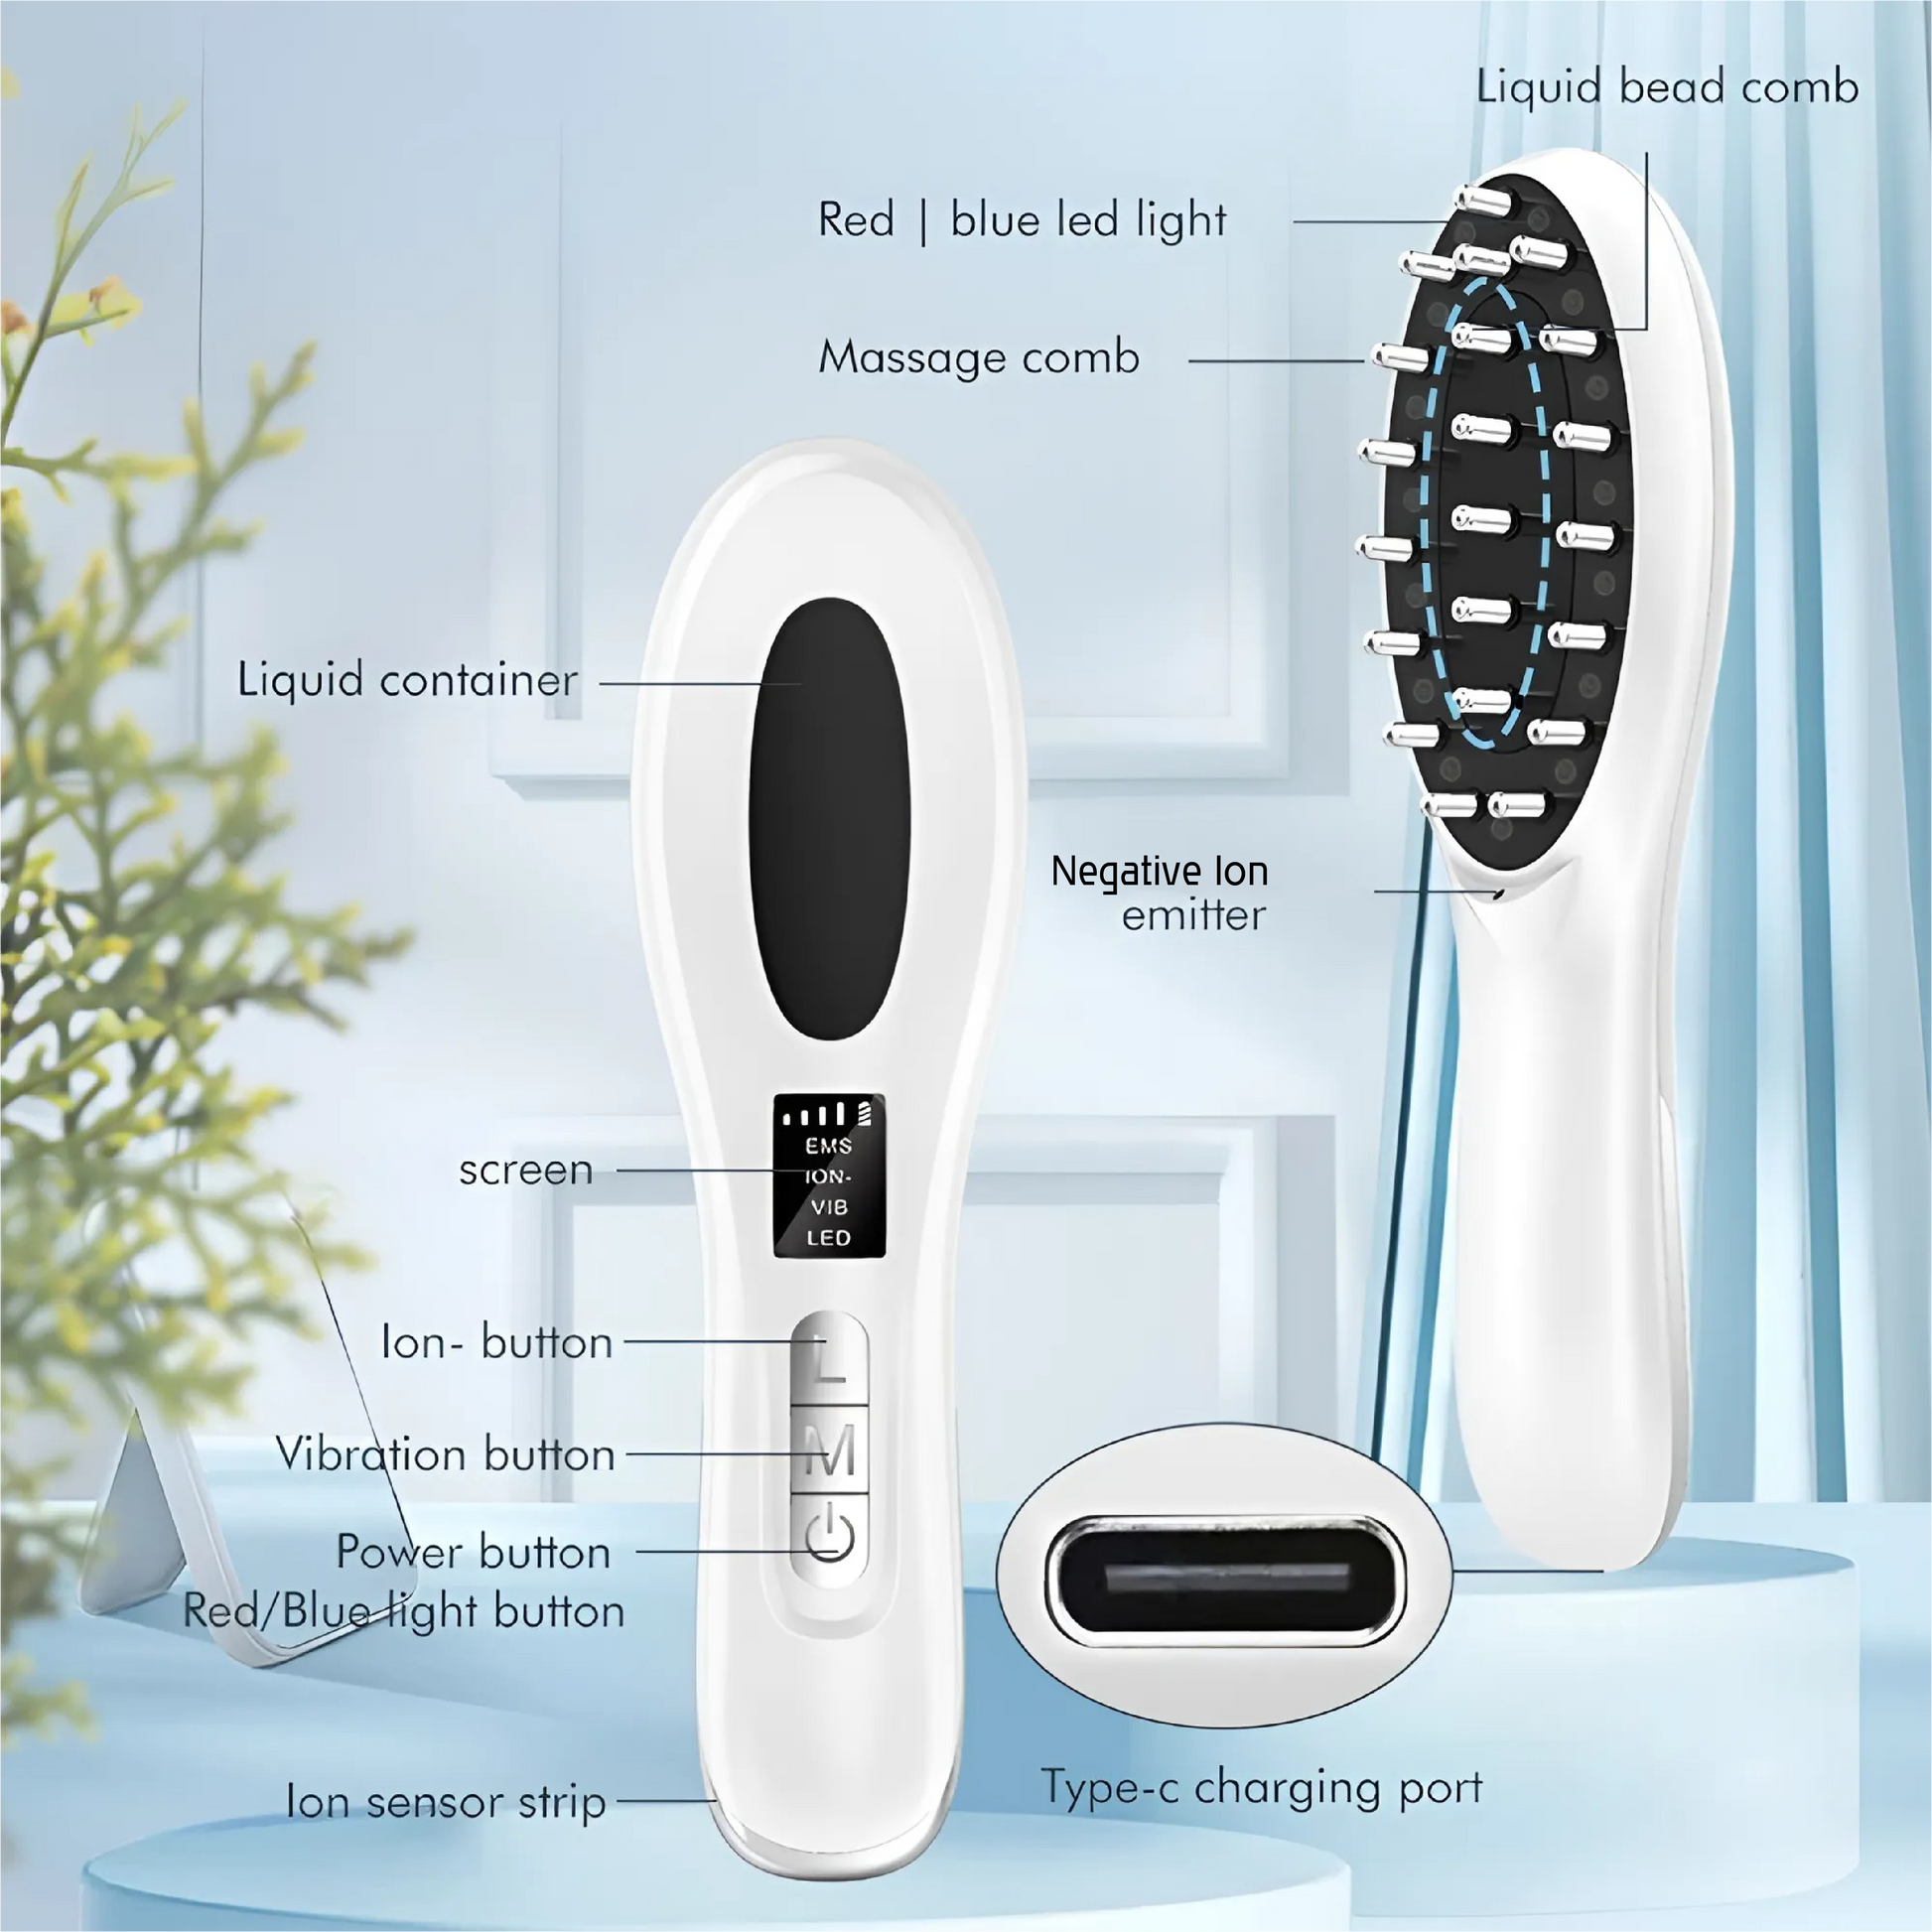 Eletric massage vibration device for hair growth, get fuller and stronger hair, stop hair loss in a week